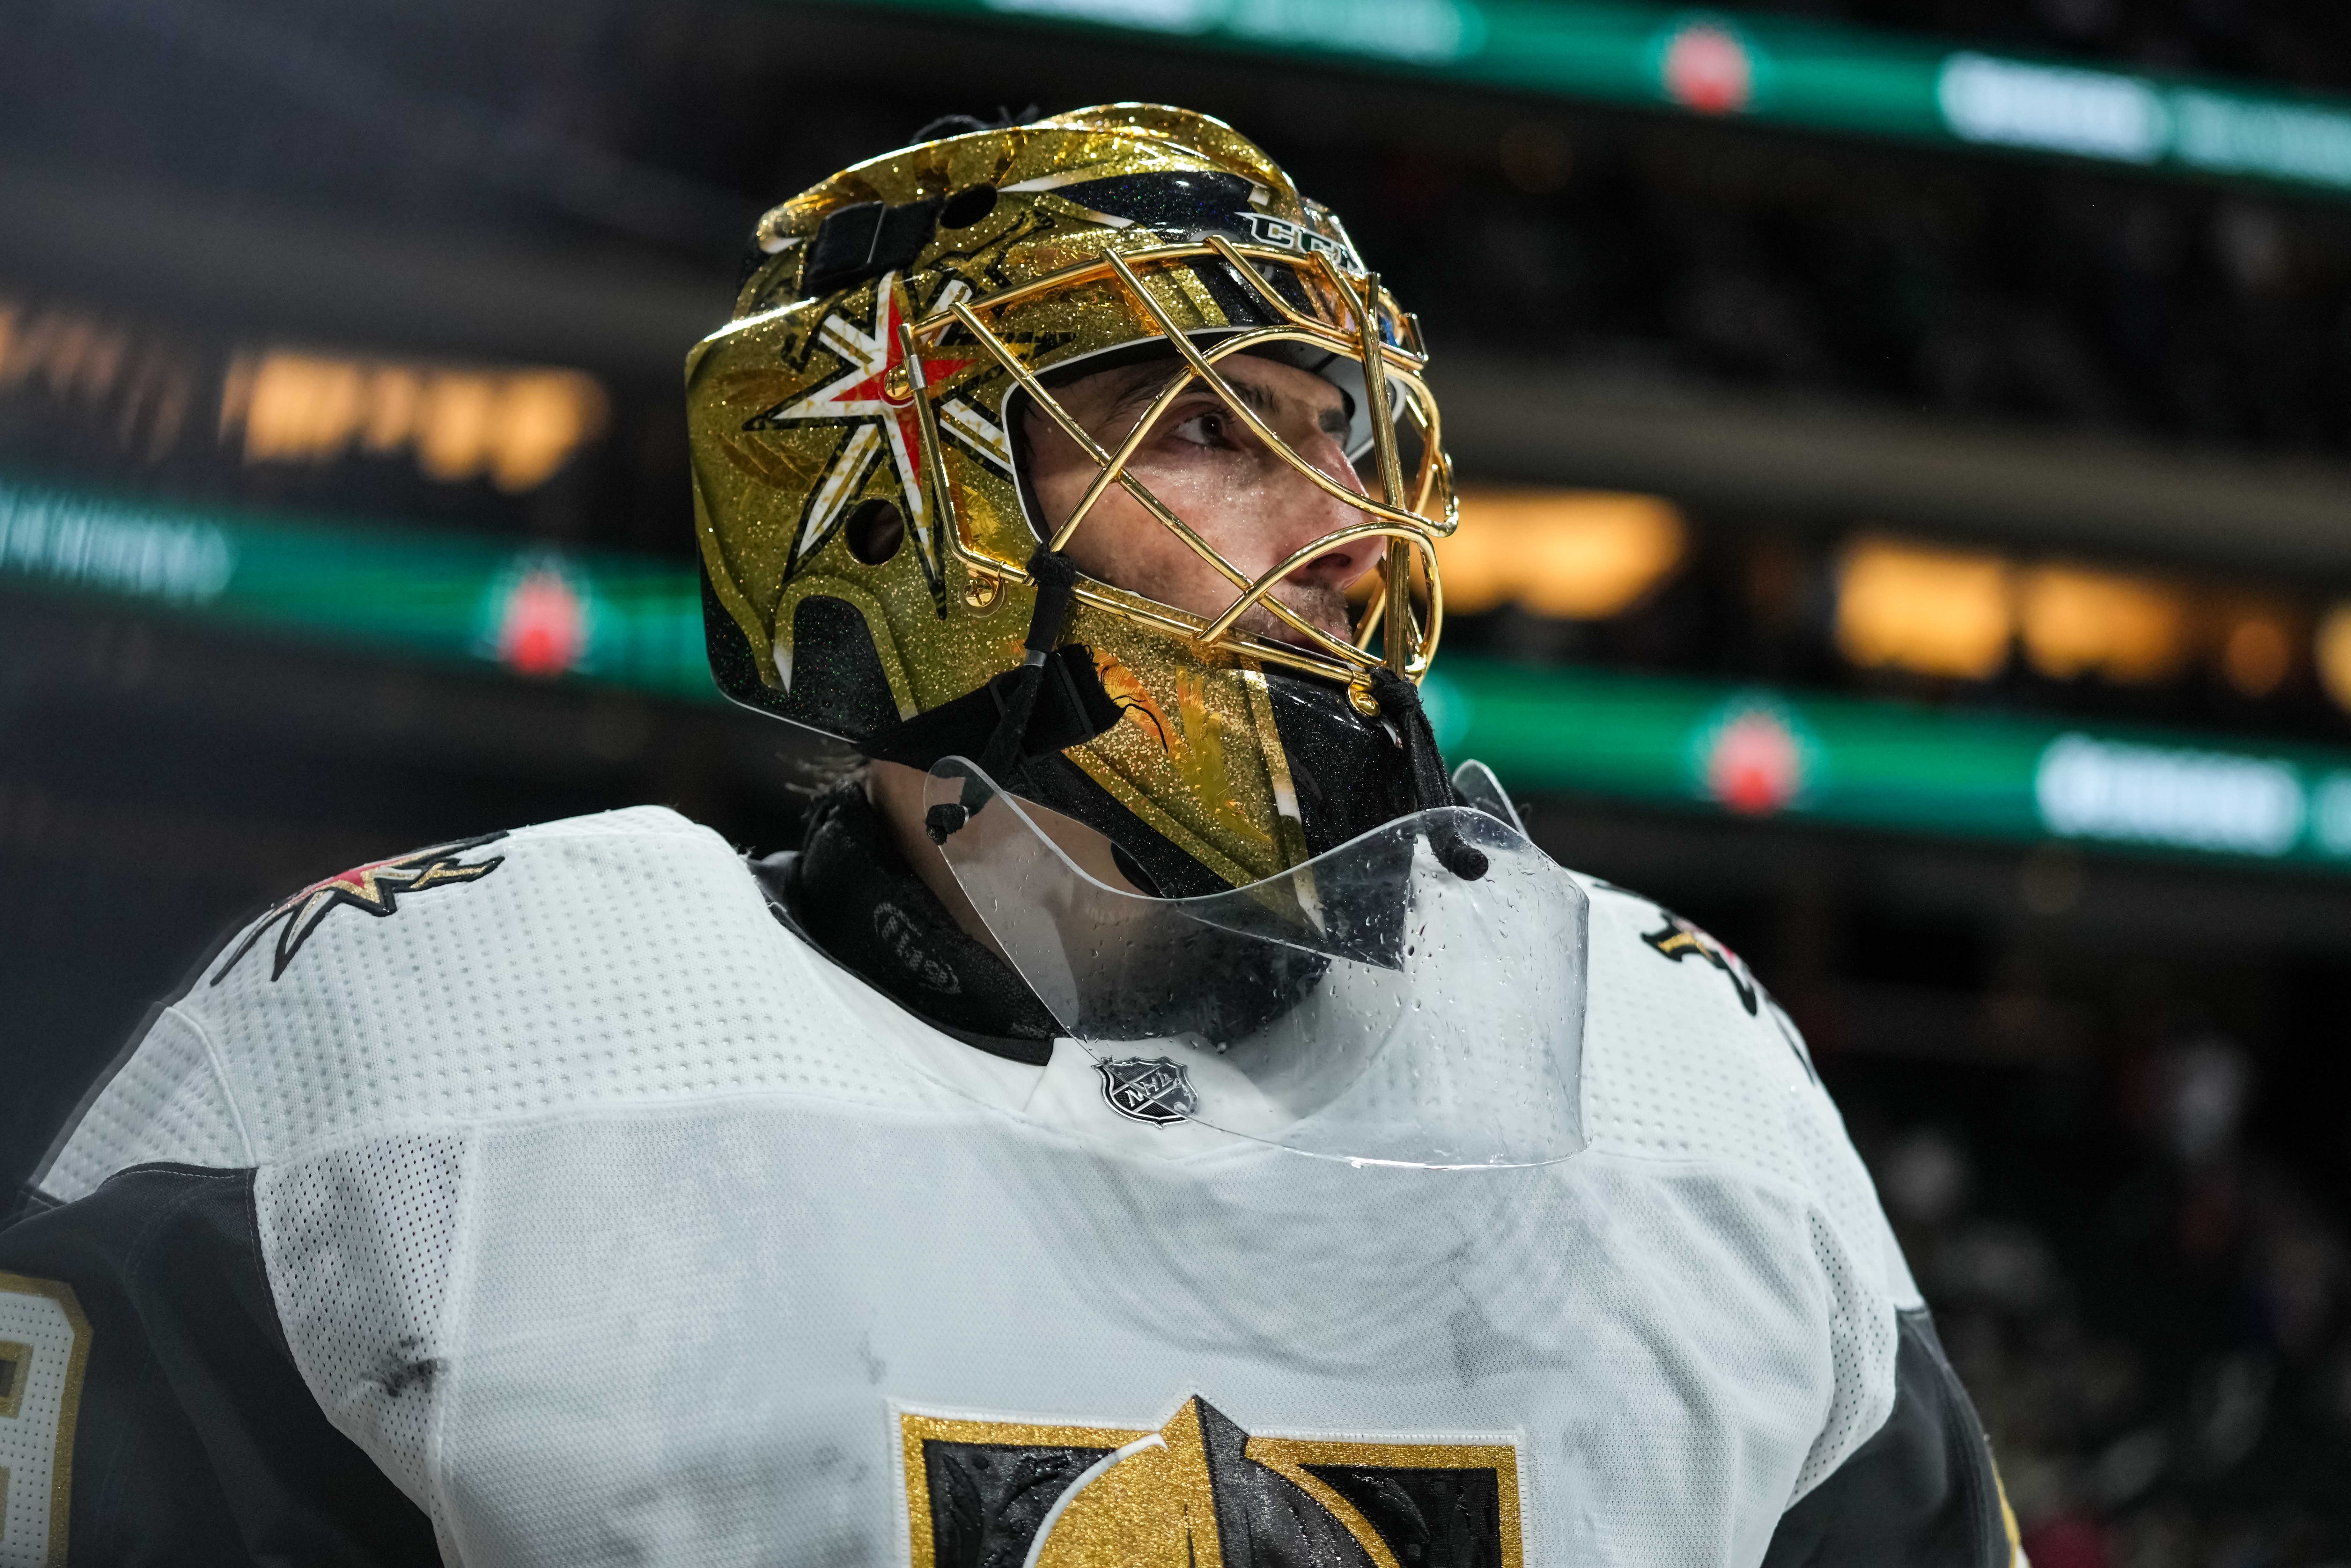 On Soldier Field ice, Marc-Andre Fleury's mask a nod to football